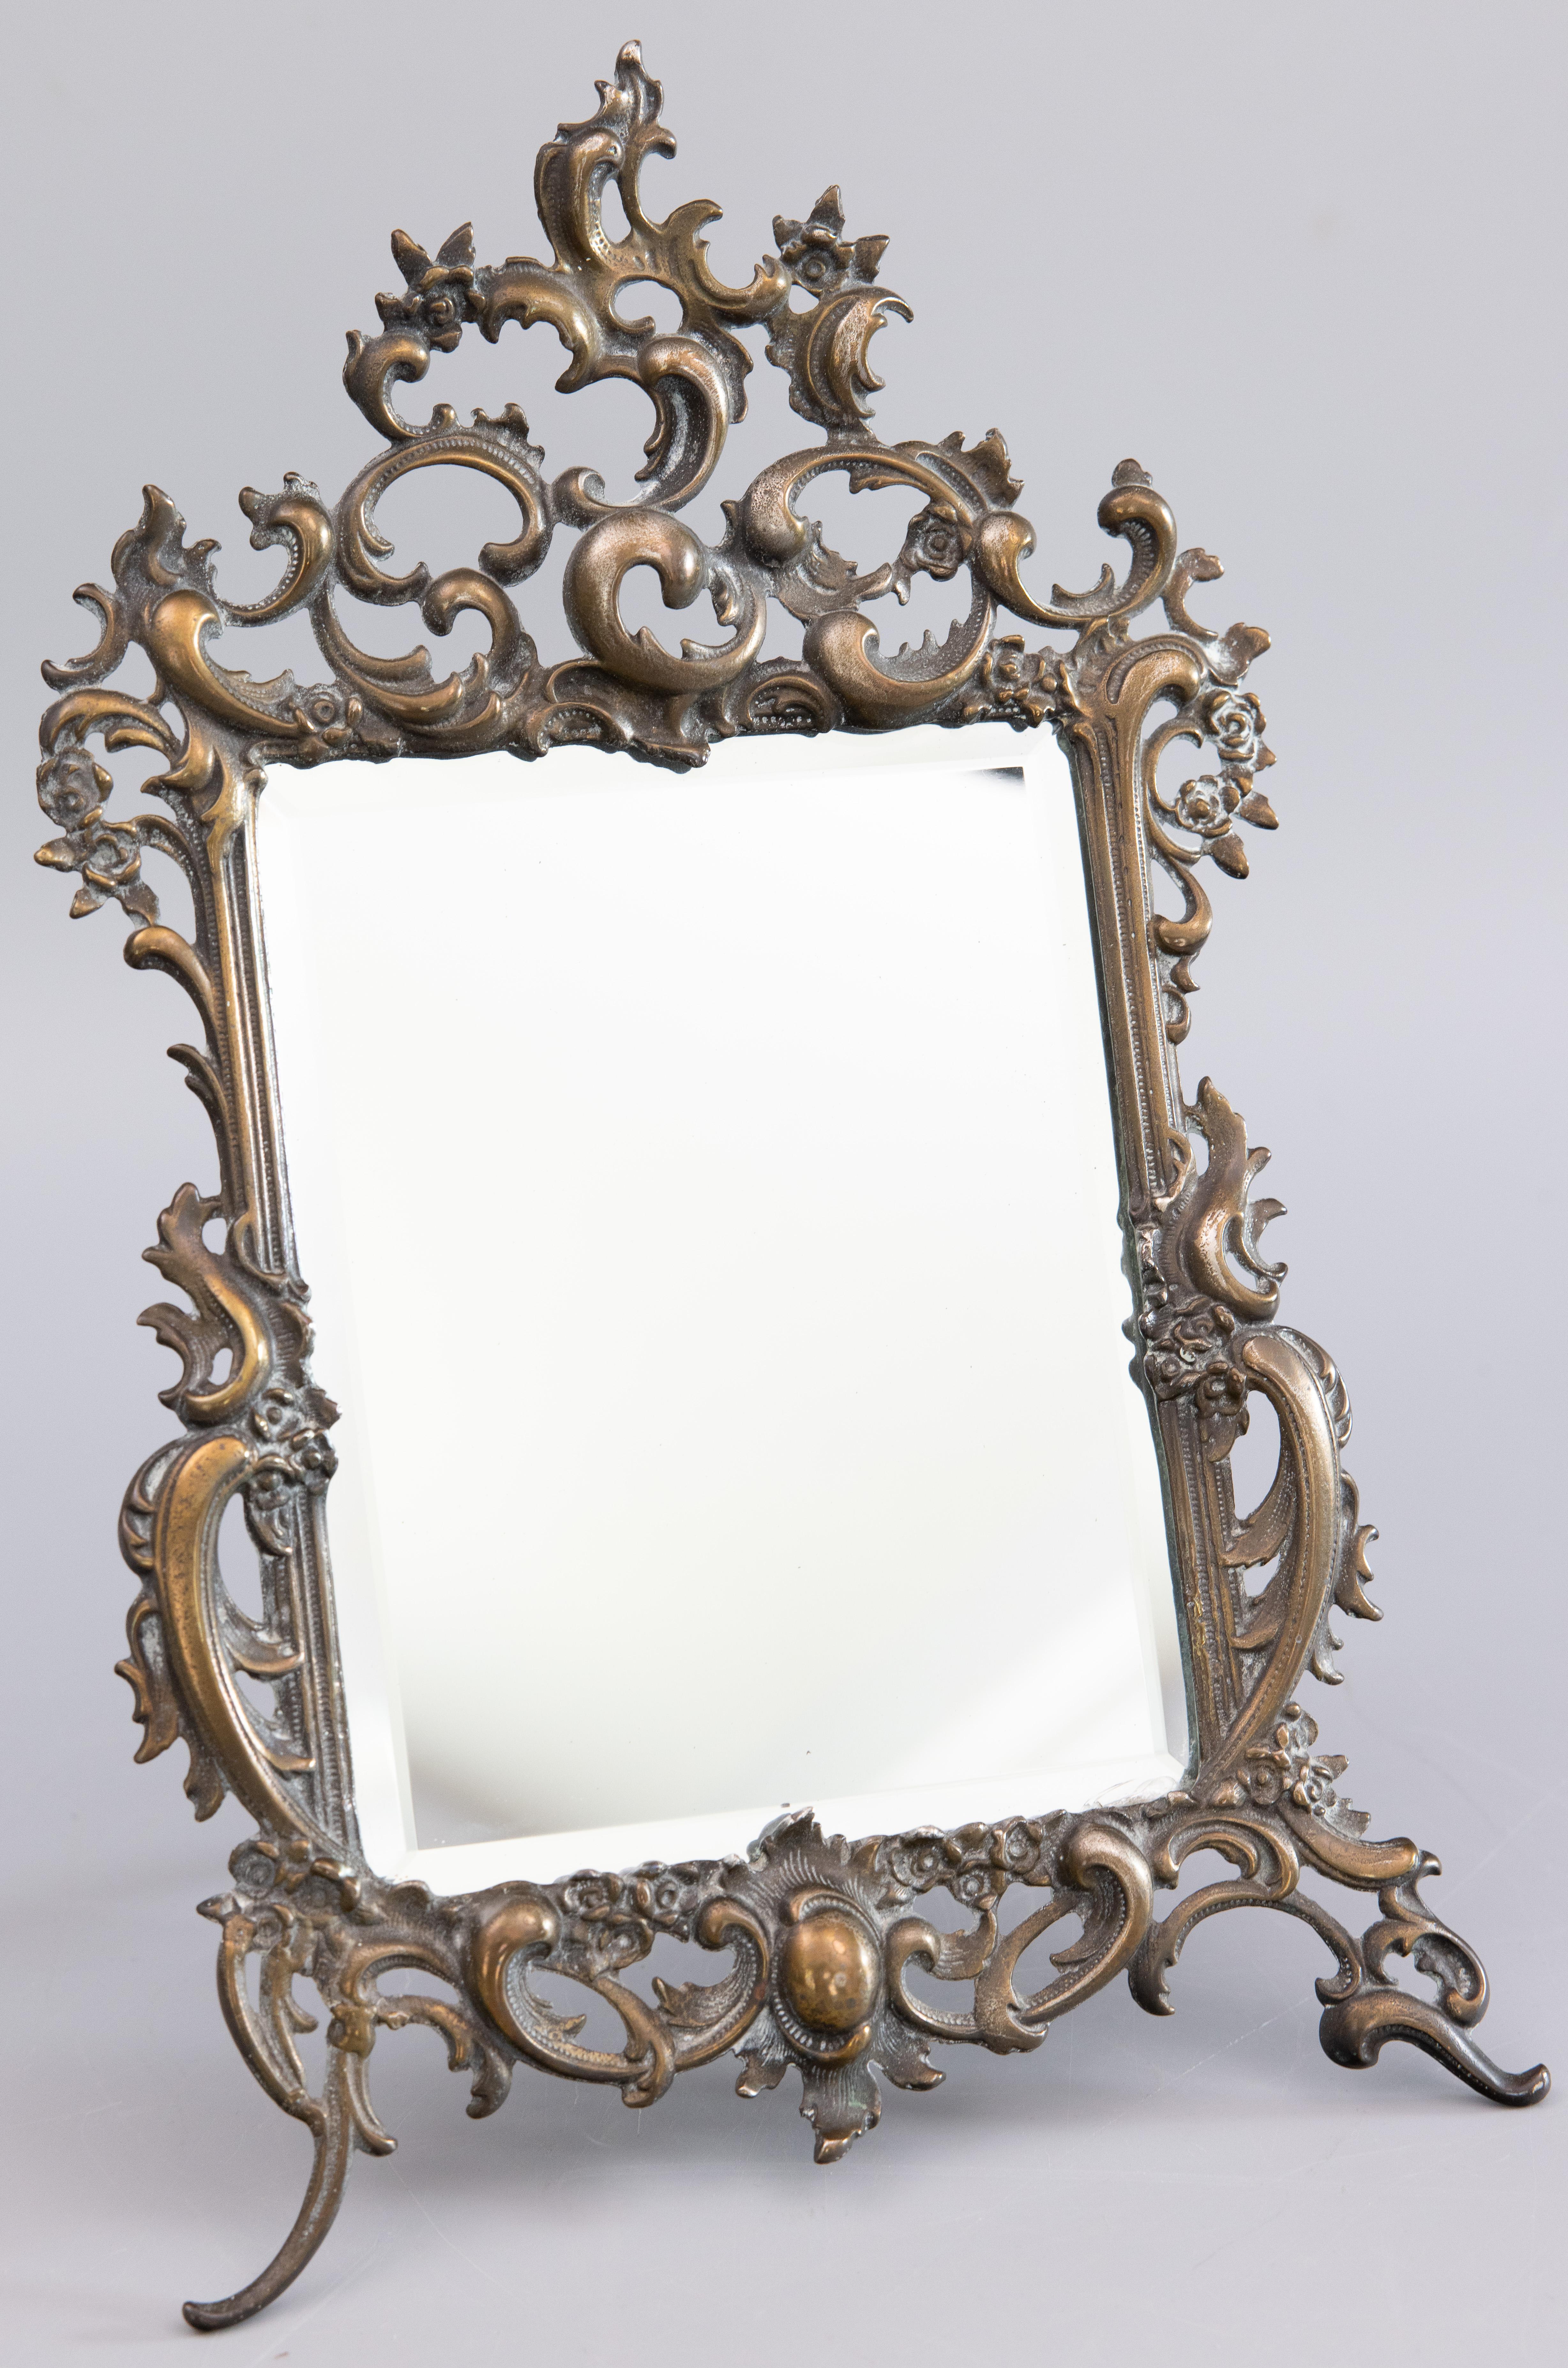 A gorgeous antique French Rococo style brass tabletop dresser or vanity easel back mirror with an ornate scroll border, circa 1900. This fine mirror is well made and heavy, weighing 4 lbs, with a lovely patina and it retains the original beveled